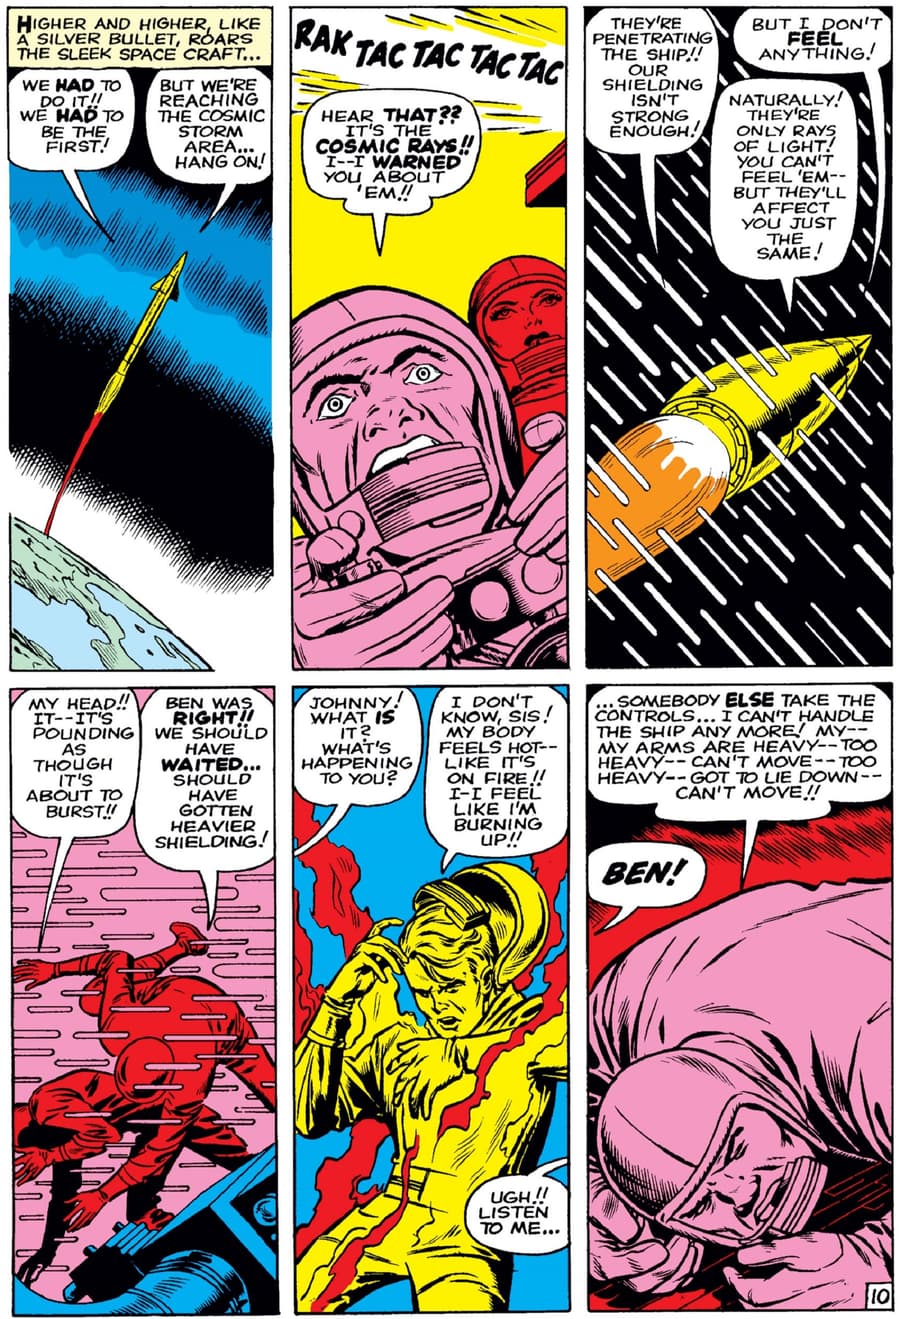 The Fantastic Four are bombarded by cosmic rays.